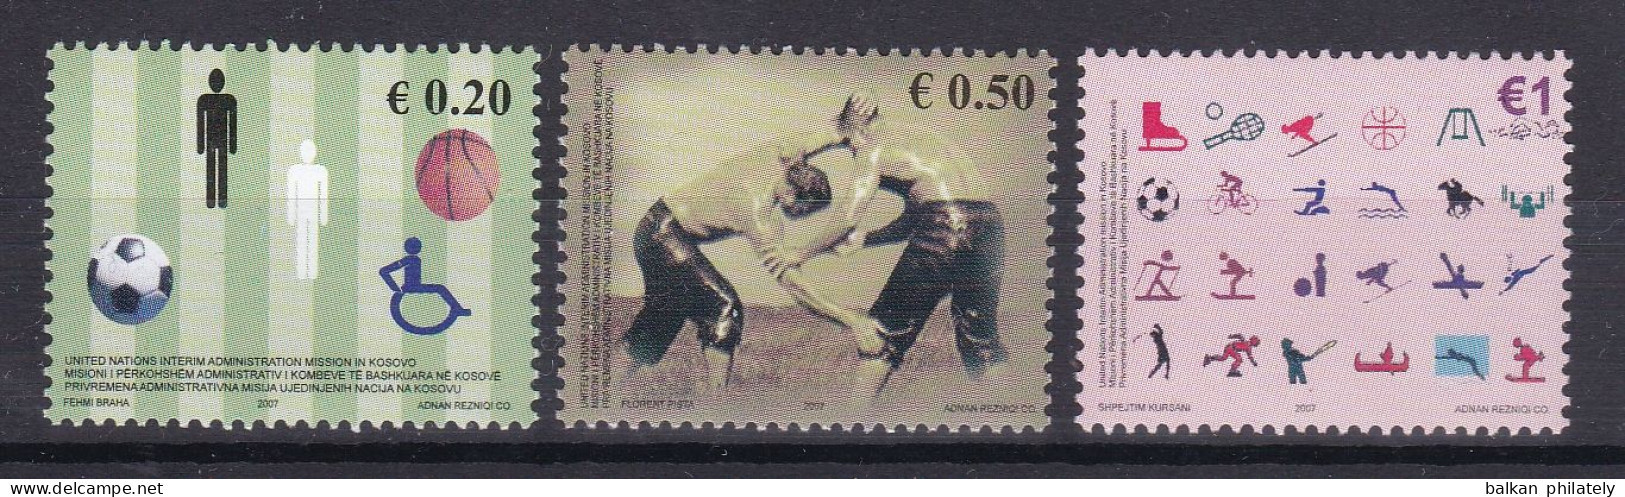 Kosovo 2007 Sports Basketball Football Disabled Persons Wrestling Tennis Cycling Equestrian UNMIK UN United Nations MNH - Nuevos